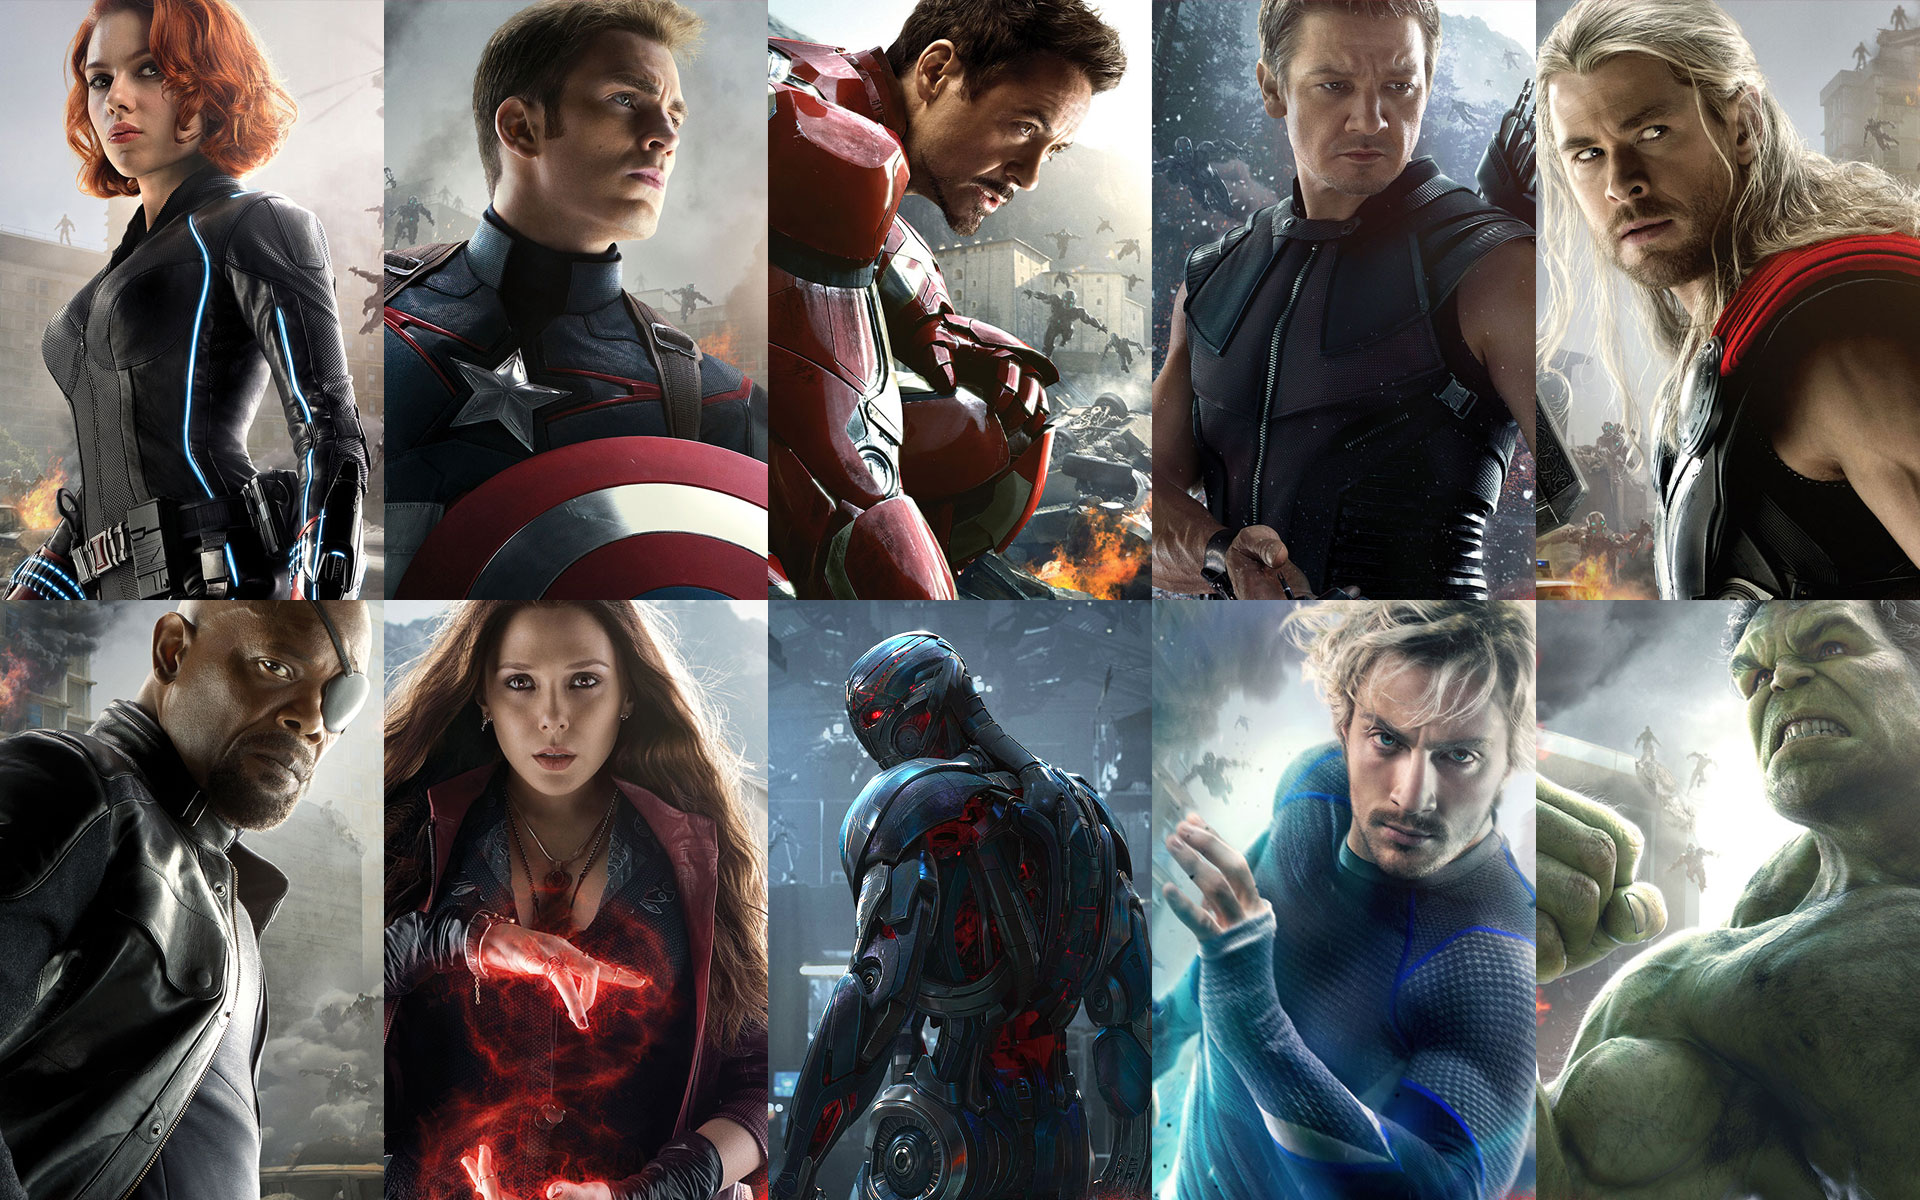 avengers-2-age-of-ultron-character-posters-collage.jpg